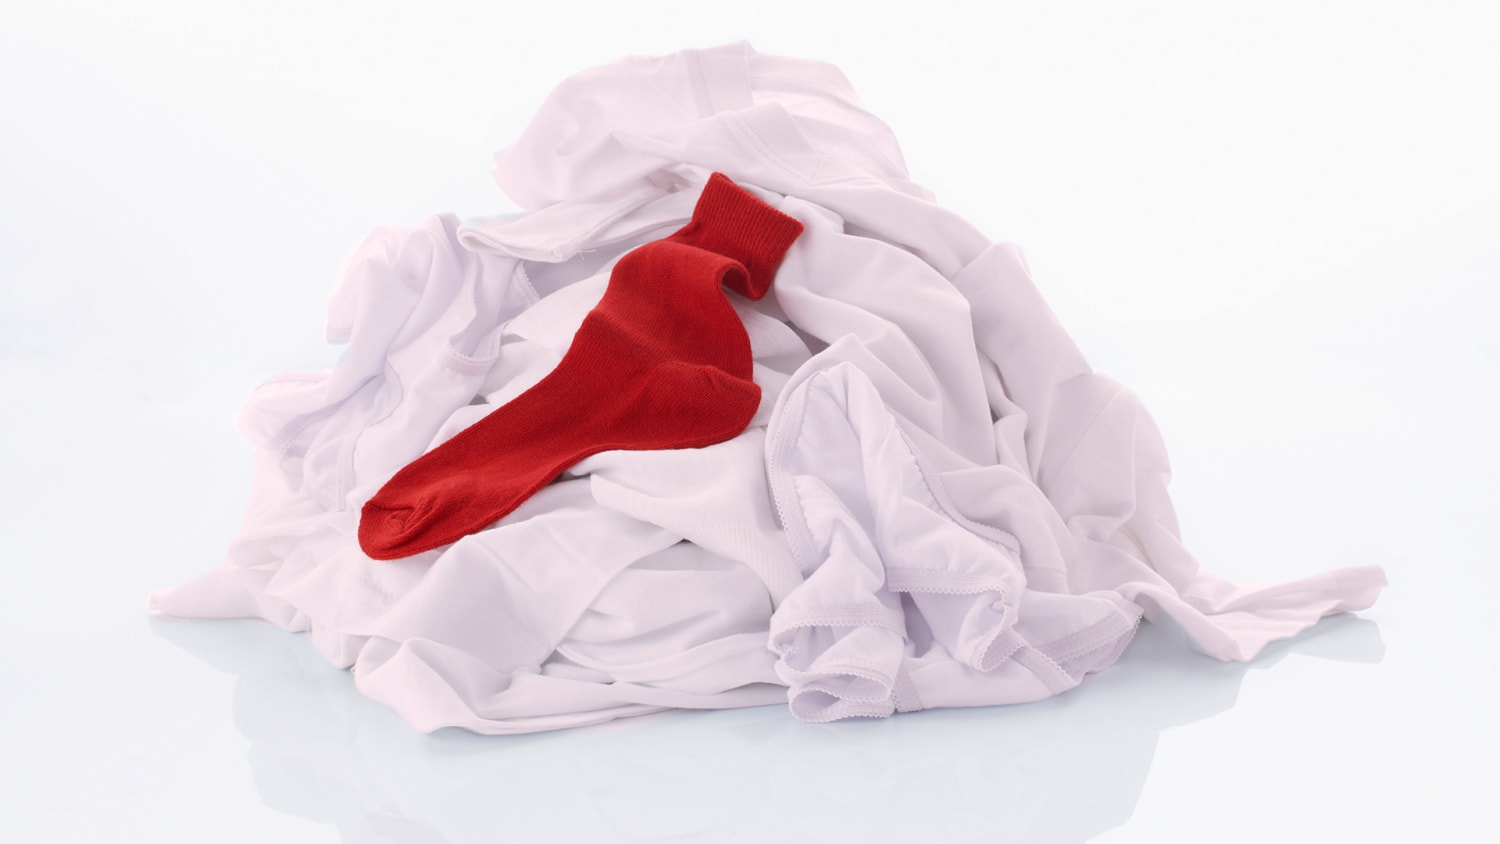 https://media-cldnry.s-nbcnews.com/image/upload/newscms/2017_10/1199930/red-sock-white-laundry-color-bleed-today-tease-170308.jpg